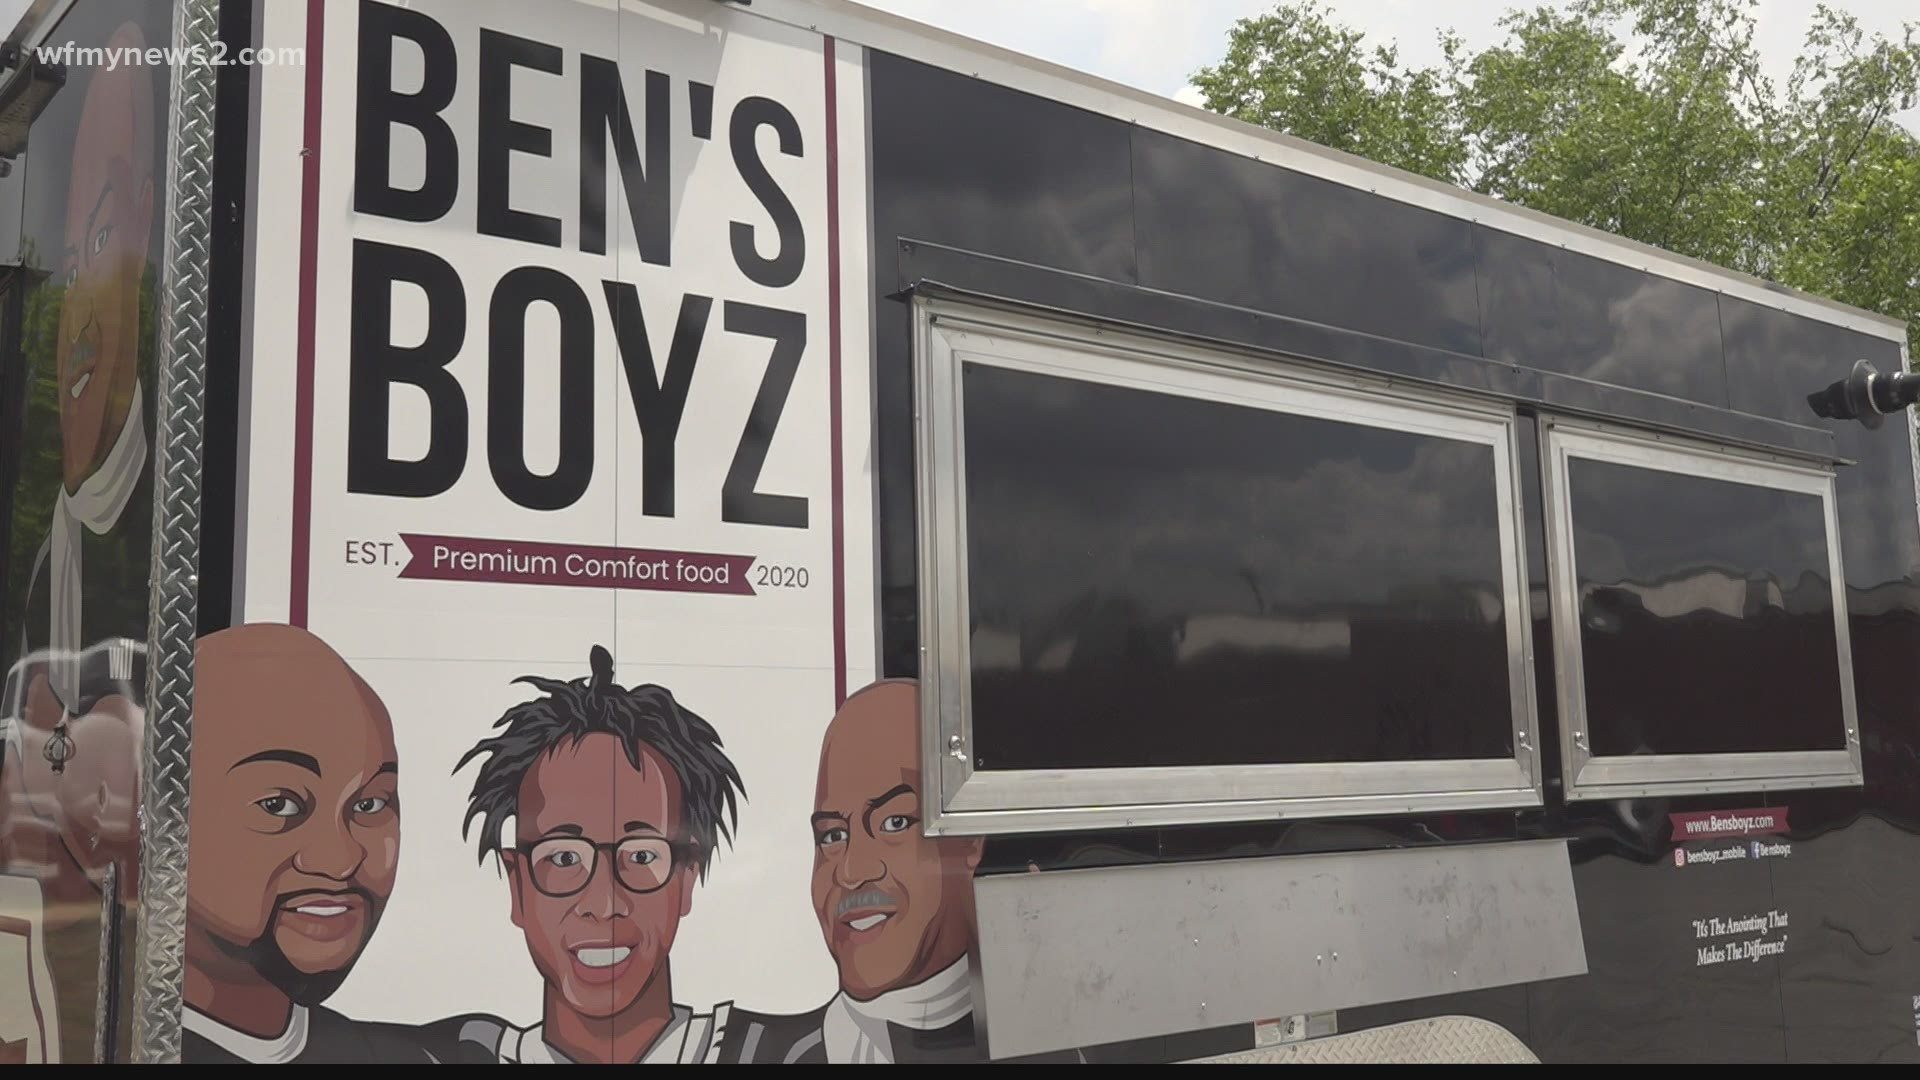 Ben’s Boyz talks about their success from starting as a food truck, to getting a new permanent location.